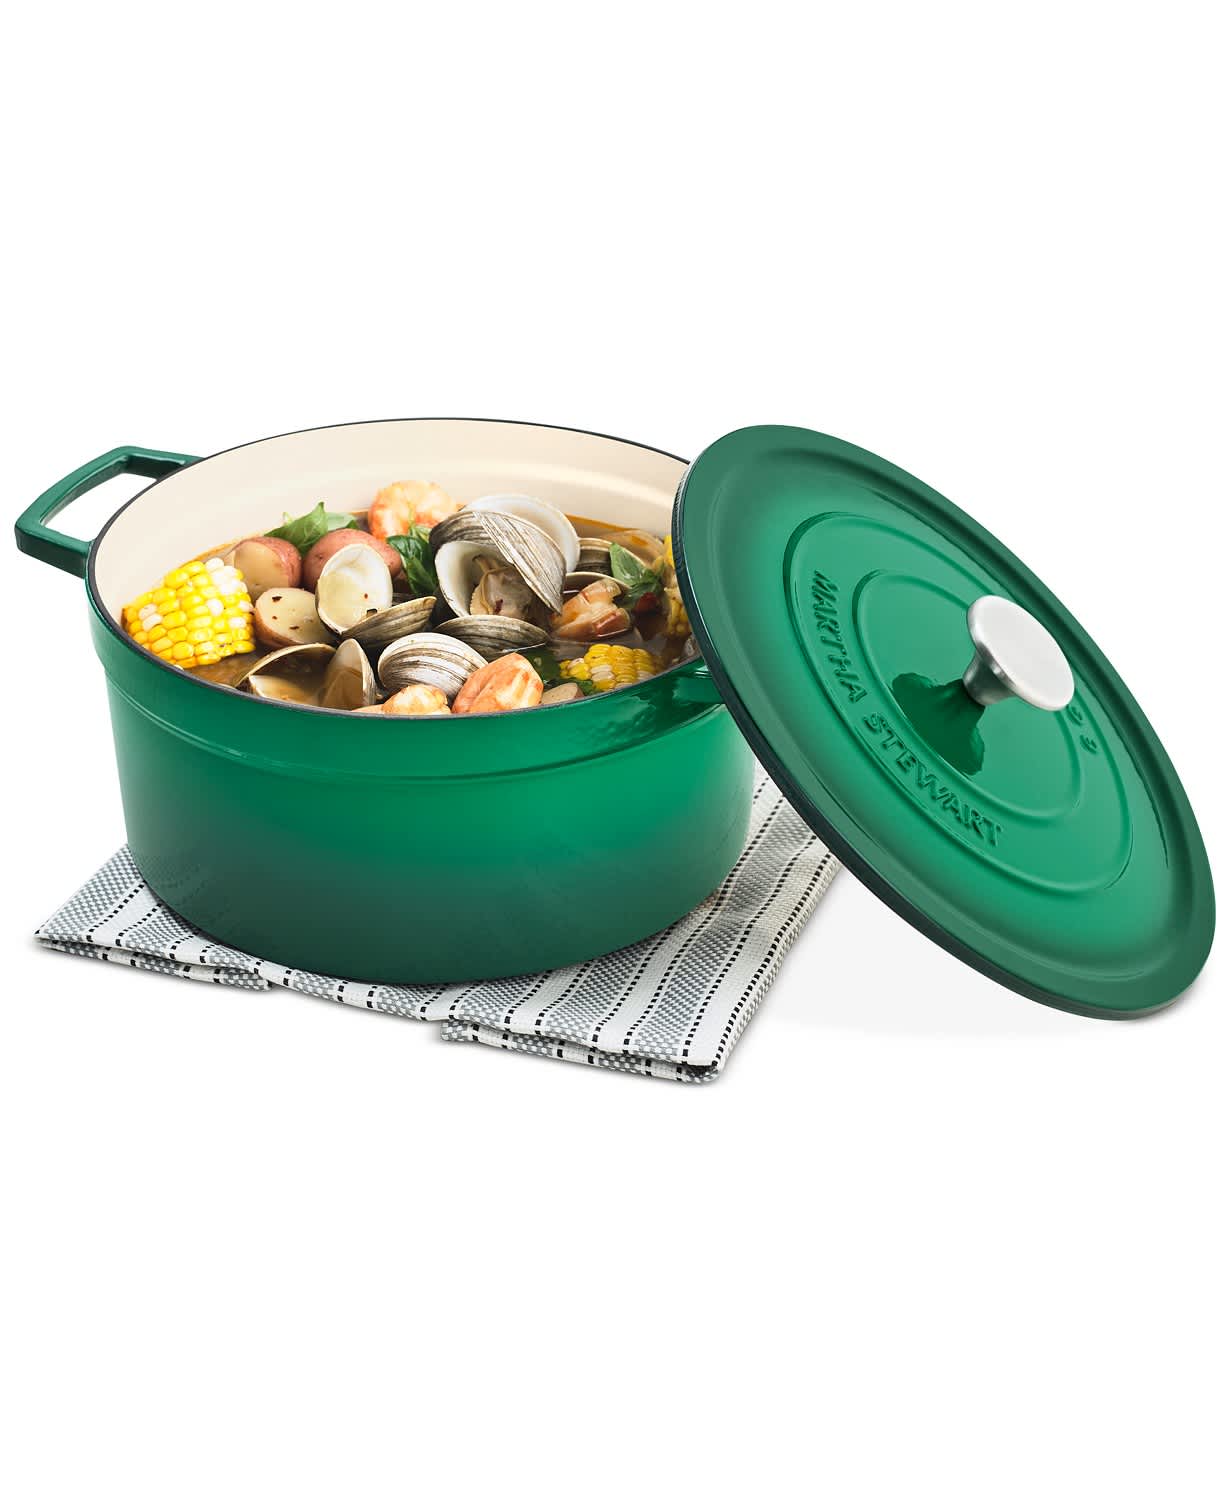 https://cdn.apartmenttherapy.info/image/upload/v1576601317/at/product%20listing/Martha_Stewart_Collection_Enameled_Cast_Iron_Round_6-Qt._Dutch_Oven_Created_for_Macy_s.jpg